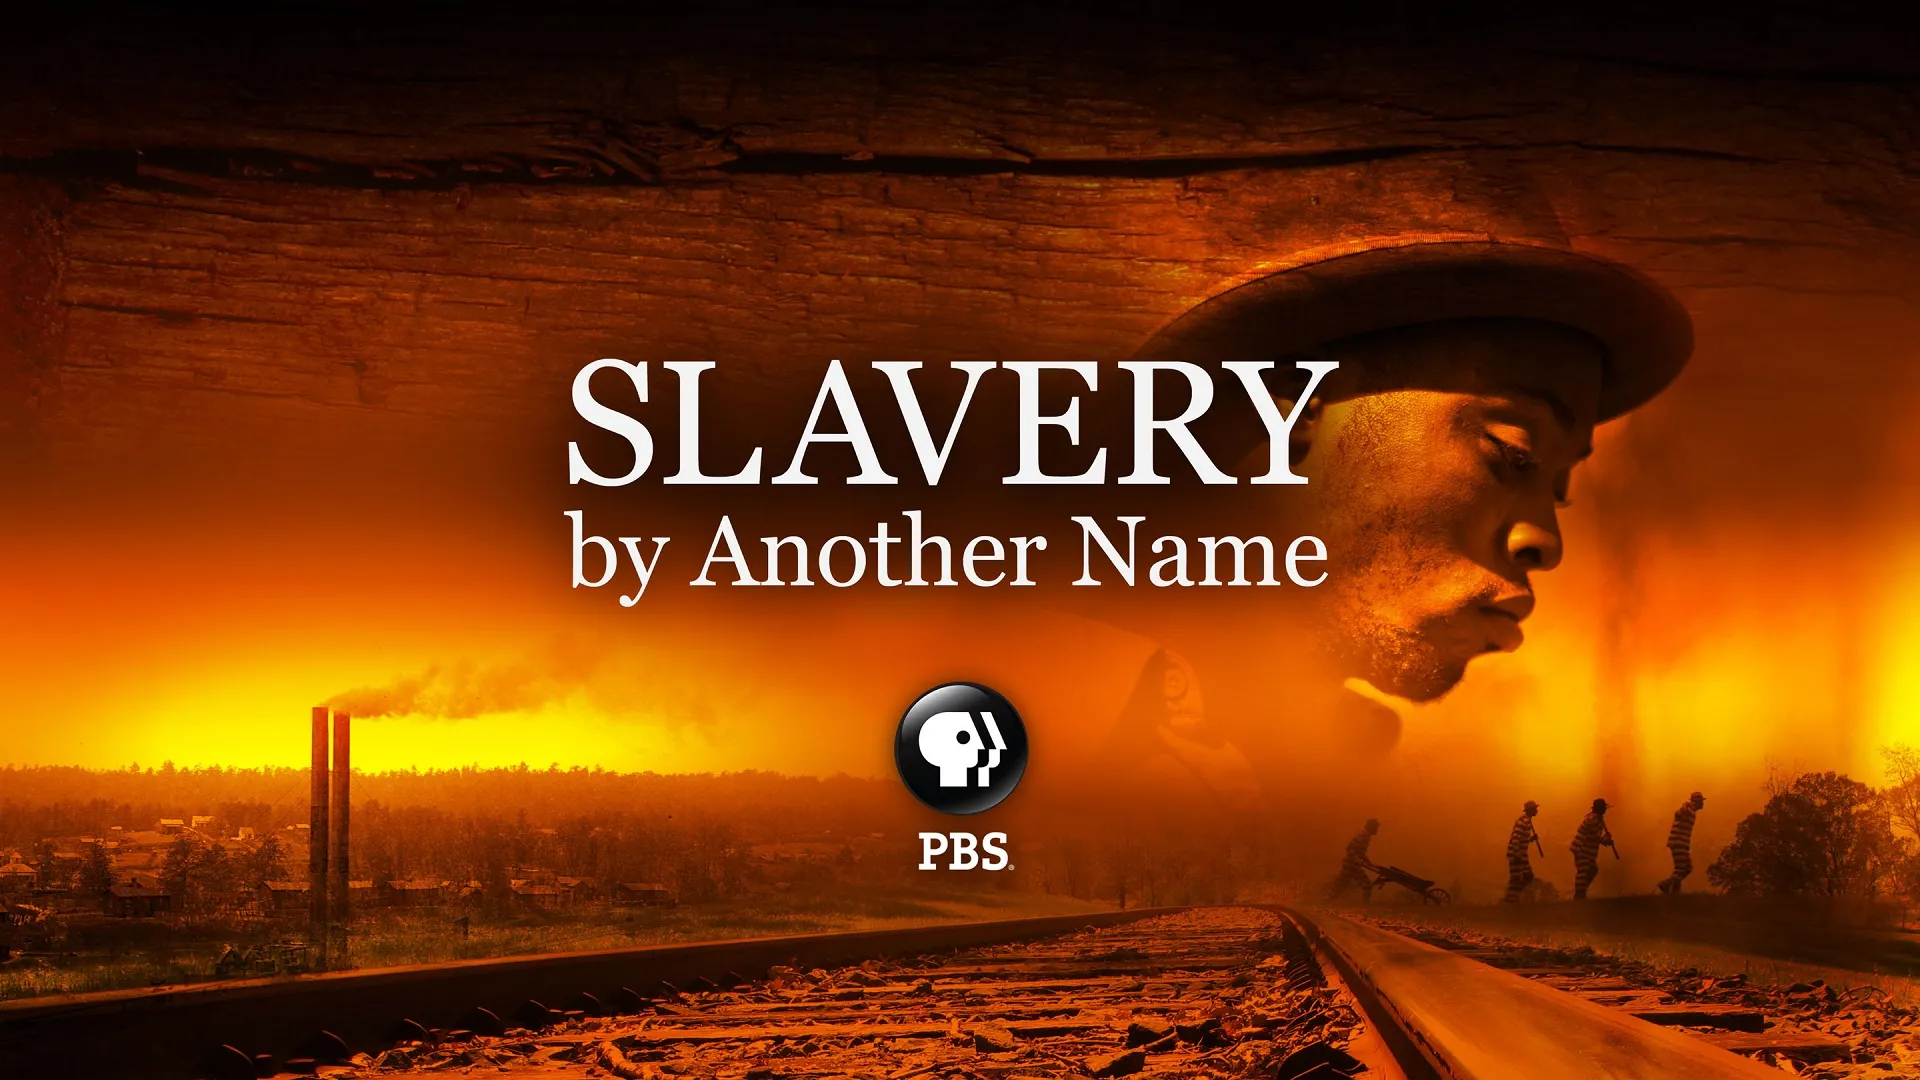 The PBS documentary, “Slavery by Another Name,” will be screened and followed by discussion led by Marc Robinson, CSUSB assistant professor of history, when the next Conversations on Race and Policing convenes virtually on Wednesday, Feb. 24.